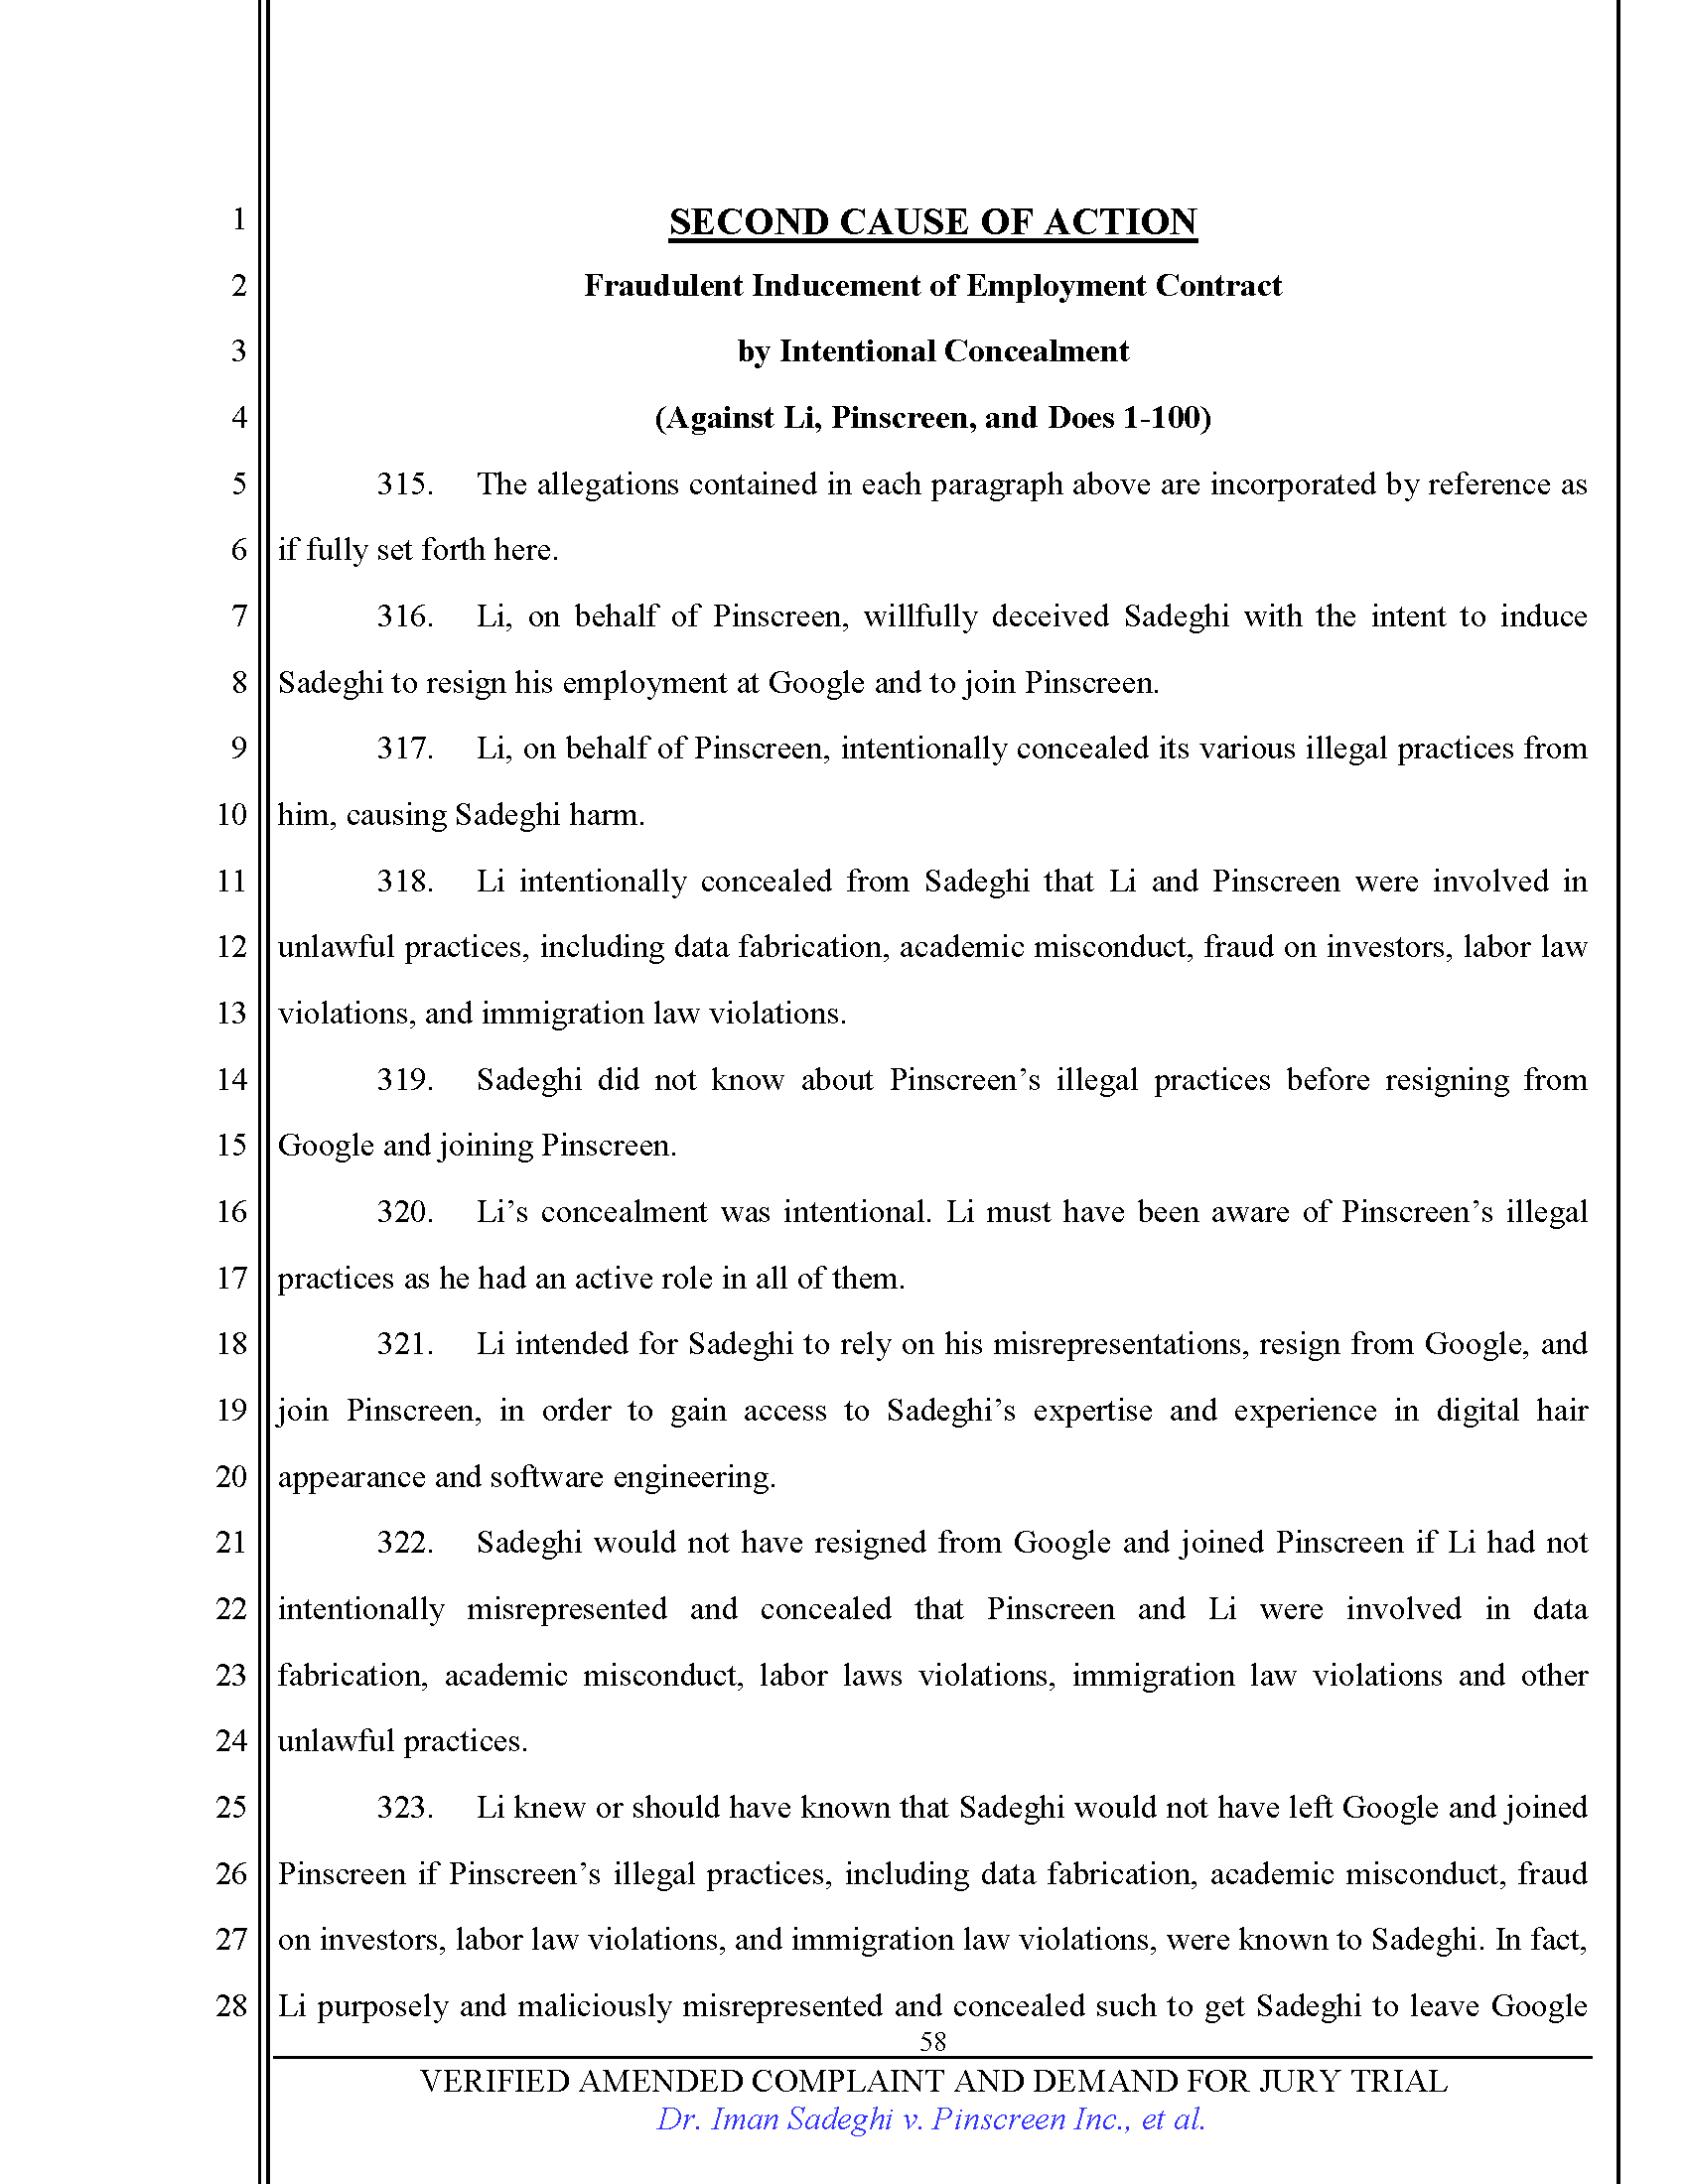 First Amended Complaint (FAC) Page 58